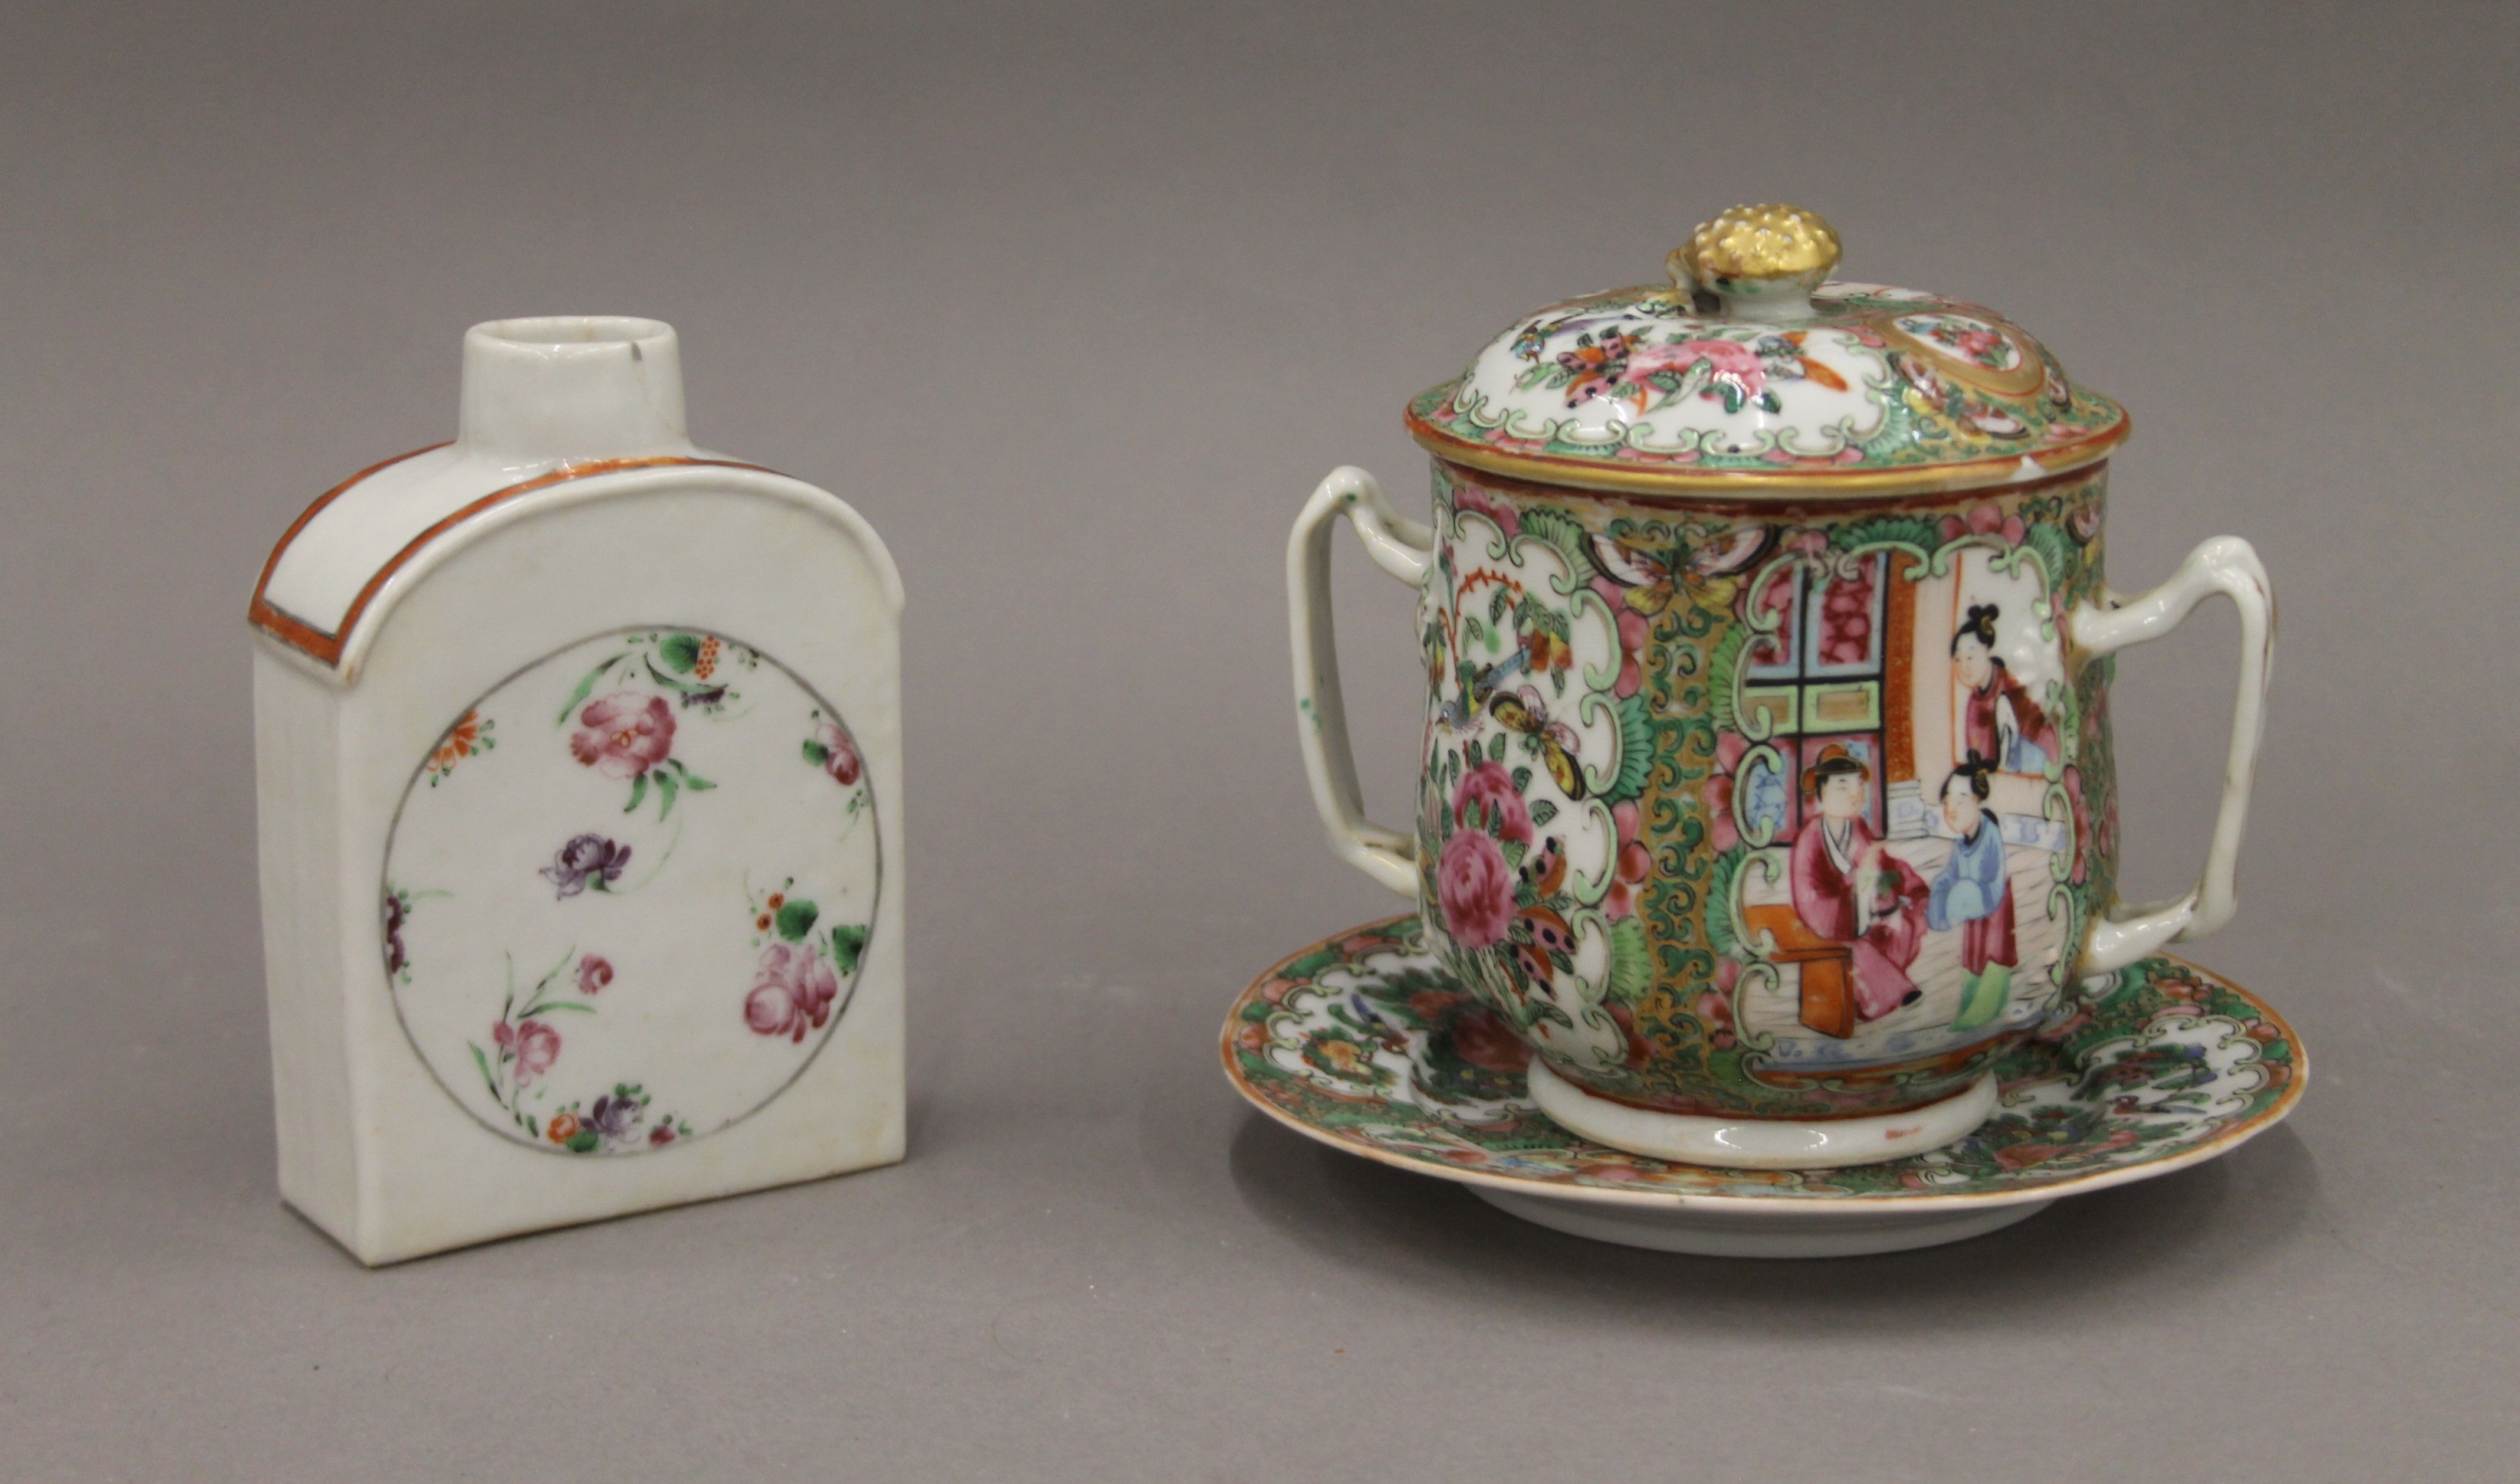 An 18th century Chinese famille rose porcelain tea caddy and a 19th century Canton porcelain twin